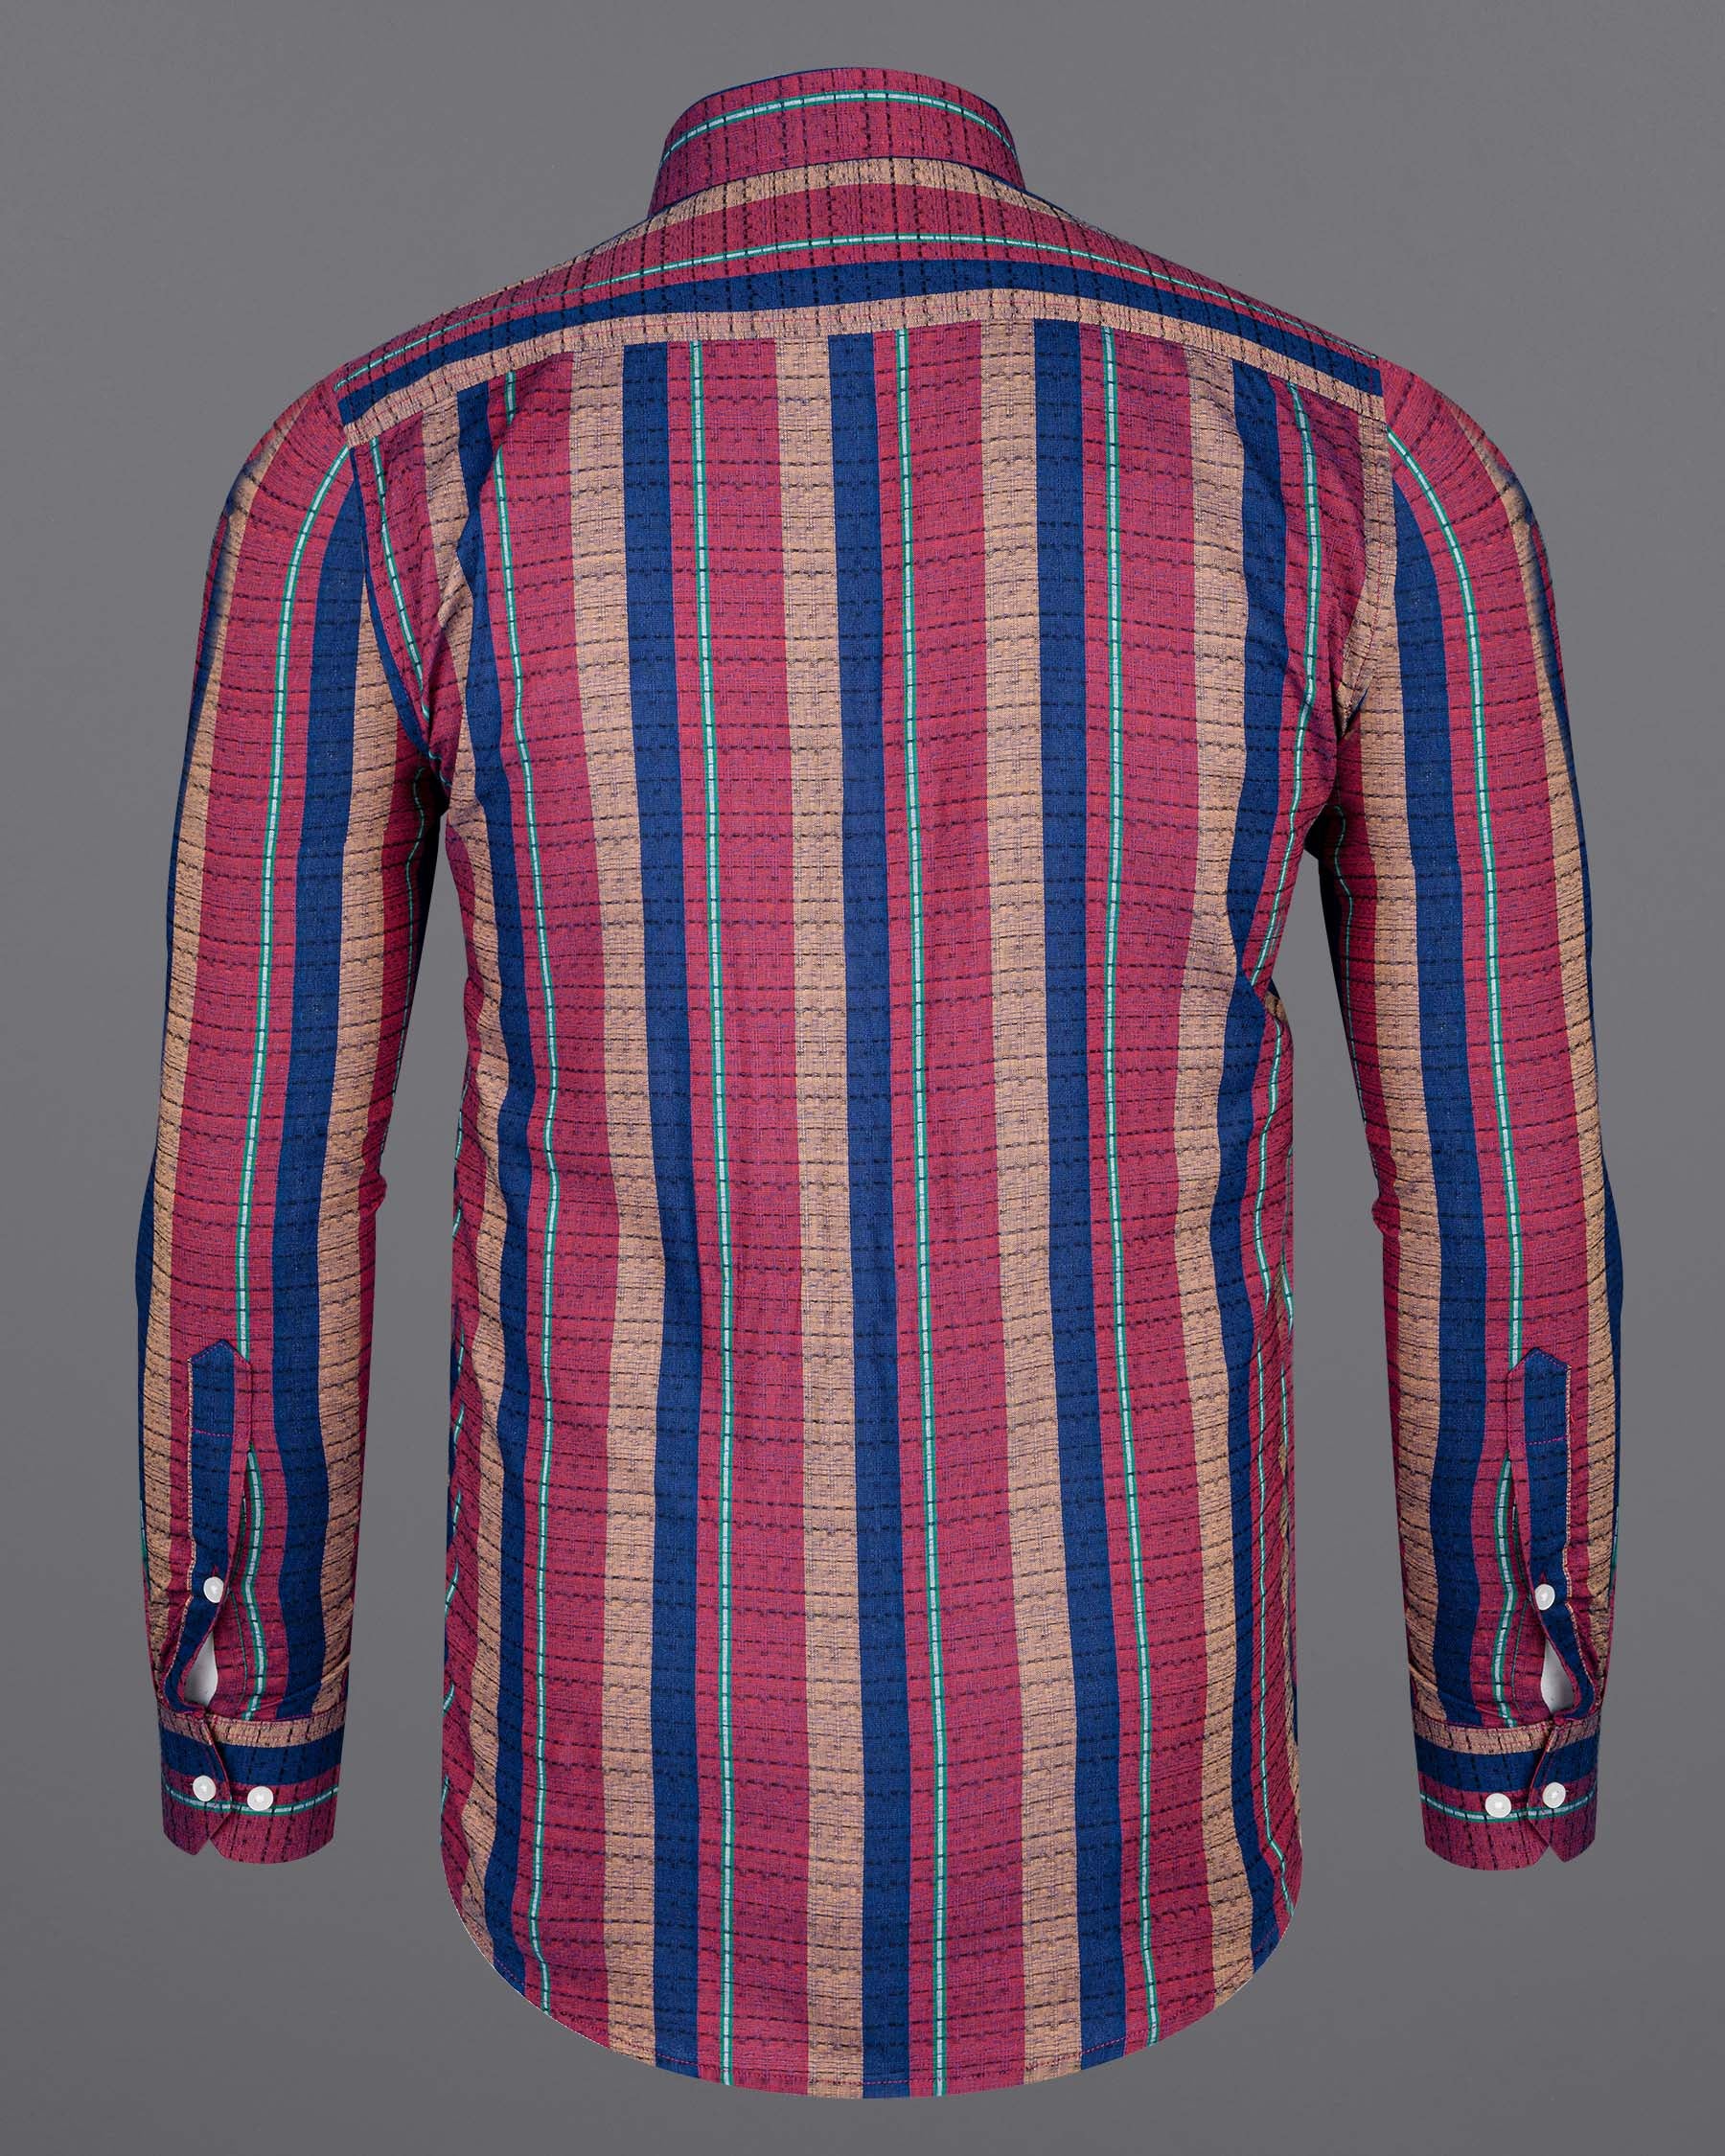 Hibiscus Red and Twilight Blue Striped Dobby Textured Premium Cotton Shirt 6989-BD-38, 6989-BD-H-38, 6989-BD-39, 6989-BD-H-39, 6989-BD-40, 6989-BD-H-40, 6989-BD-42, 6989-BD-H-42, 6989-BD-44, 6989-BD-H-44, 6989-BD-46, 6989-BD-H-46, 6989-BD-48, 6989-BD-H-48, 6989-BD-50, 6989-BD-H-50, 6989-BD-52, 6989-BD-H-52